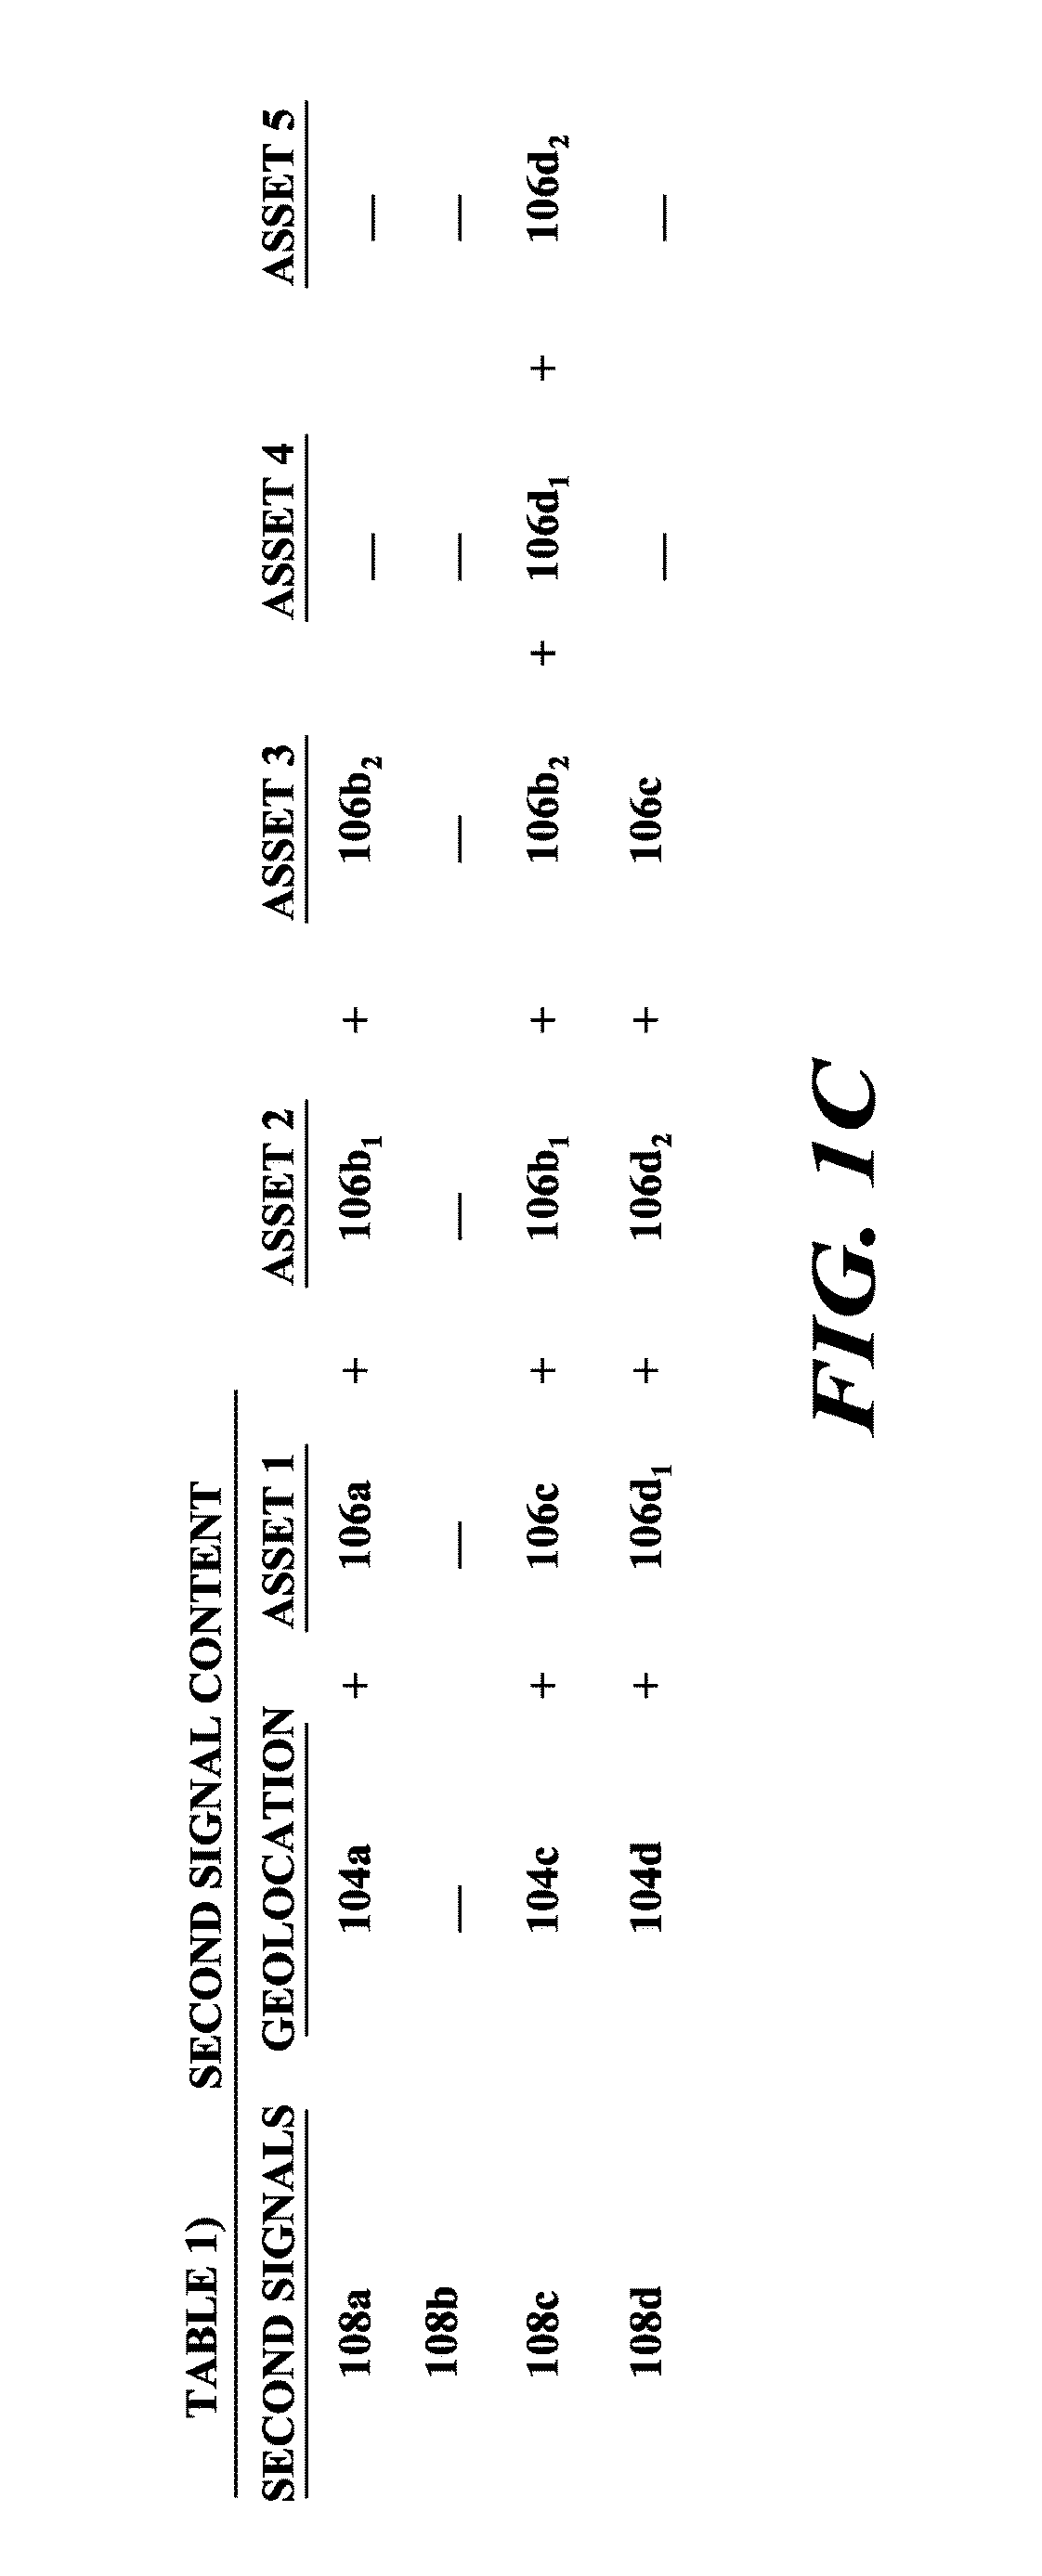 Systems and methods for asset tracking using an ad-hoc mesh network of mobile devices